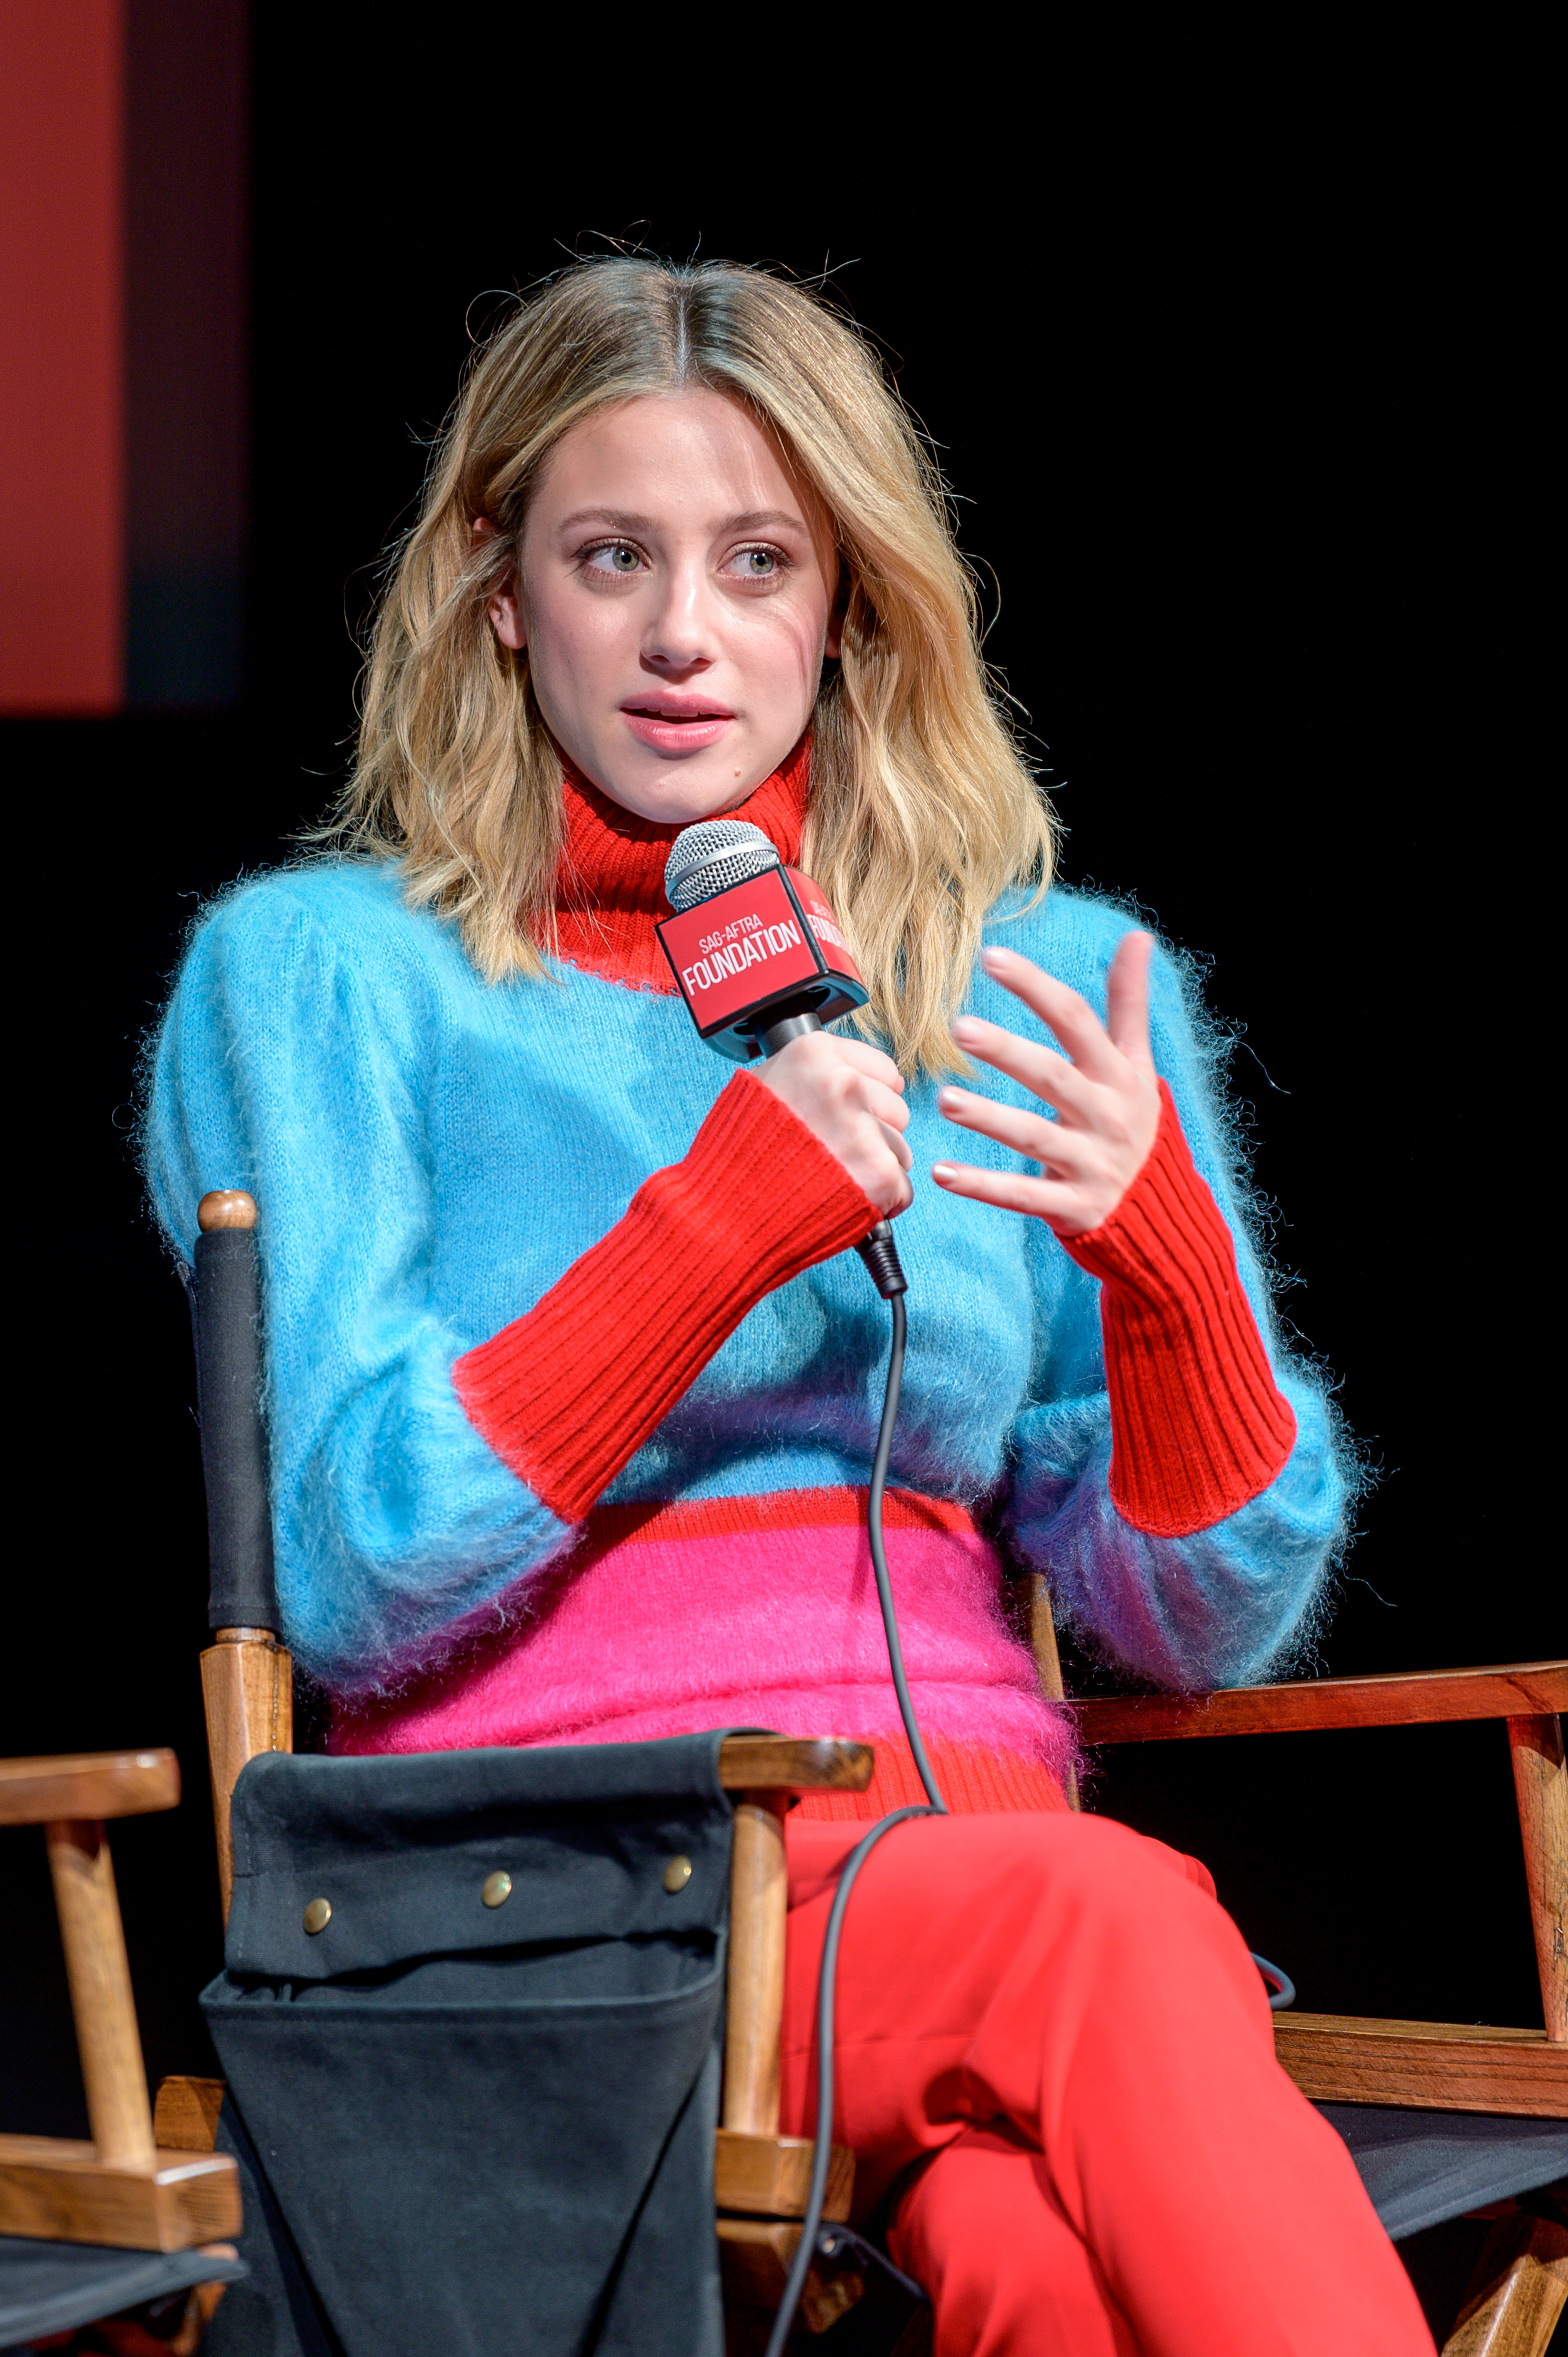 Close-up of Lili sitting and holding a microphone